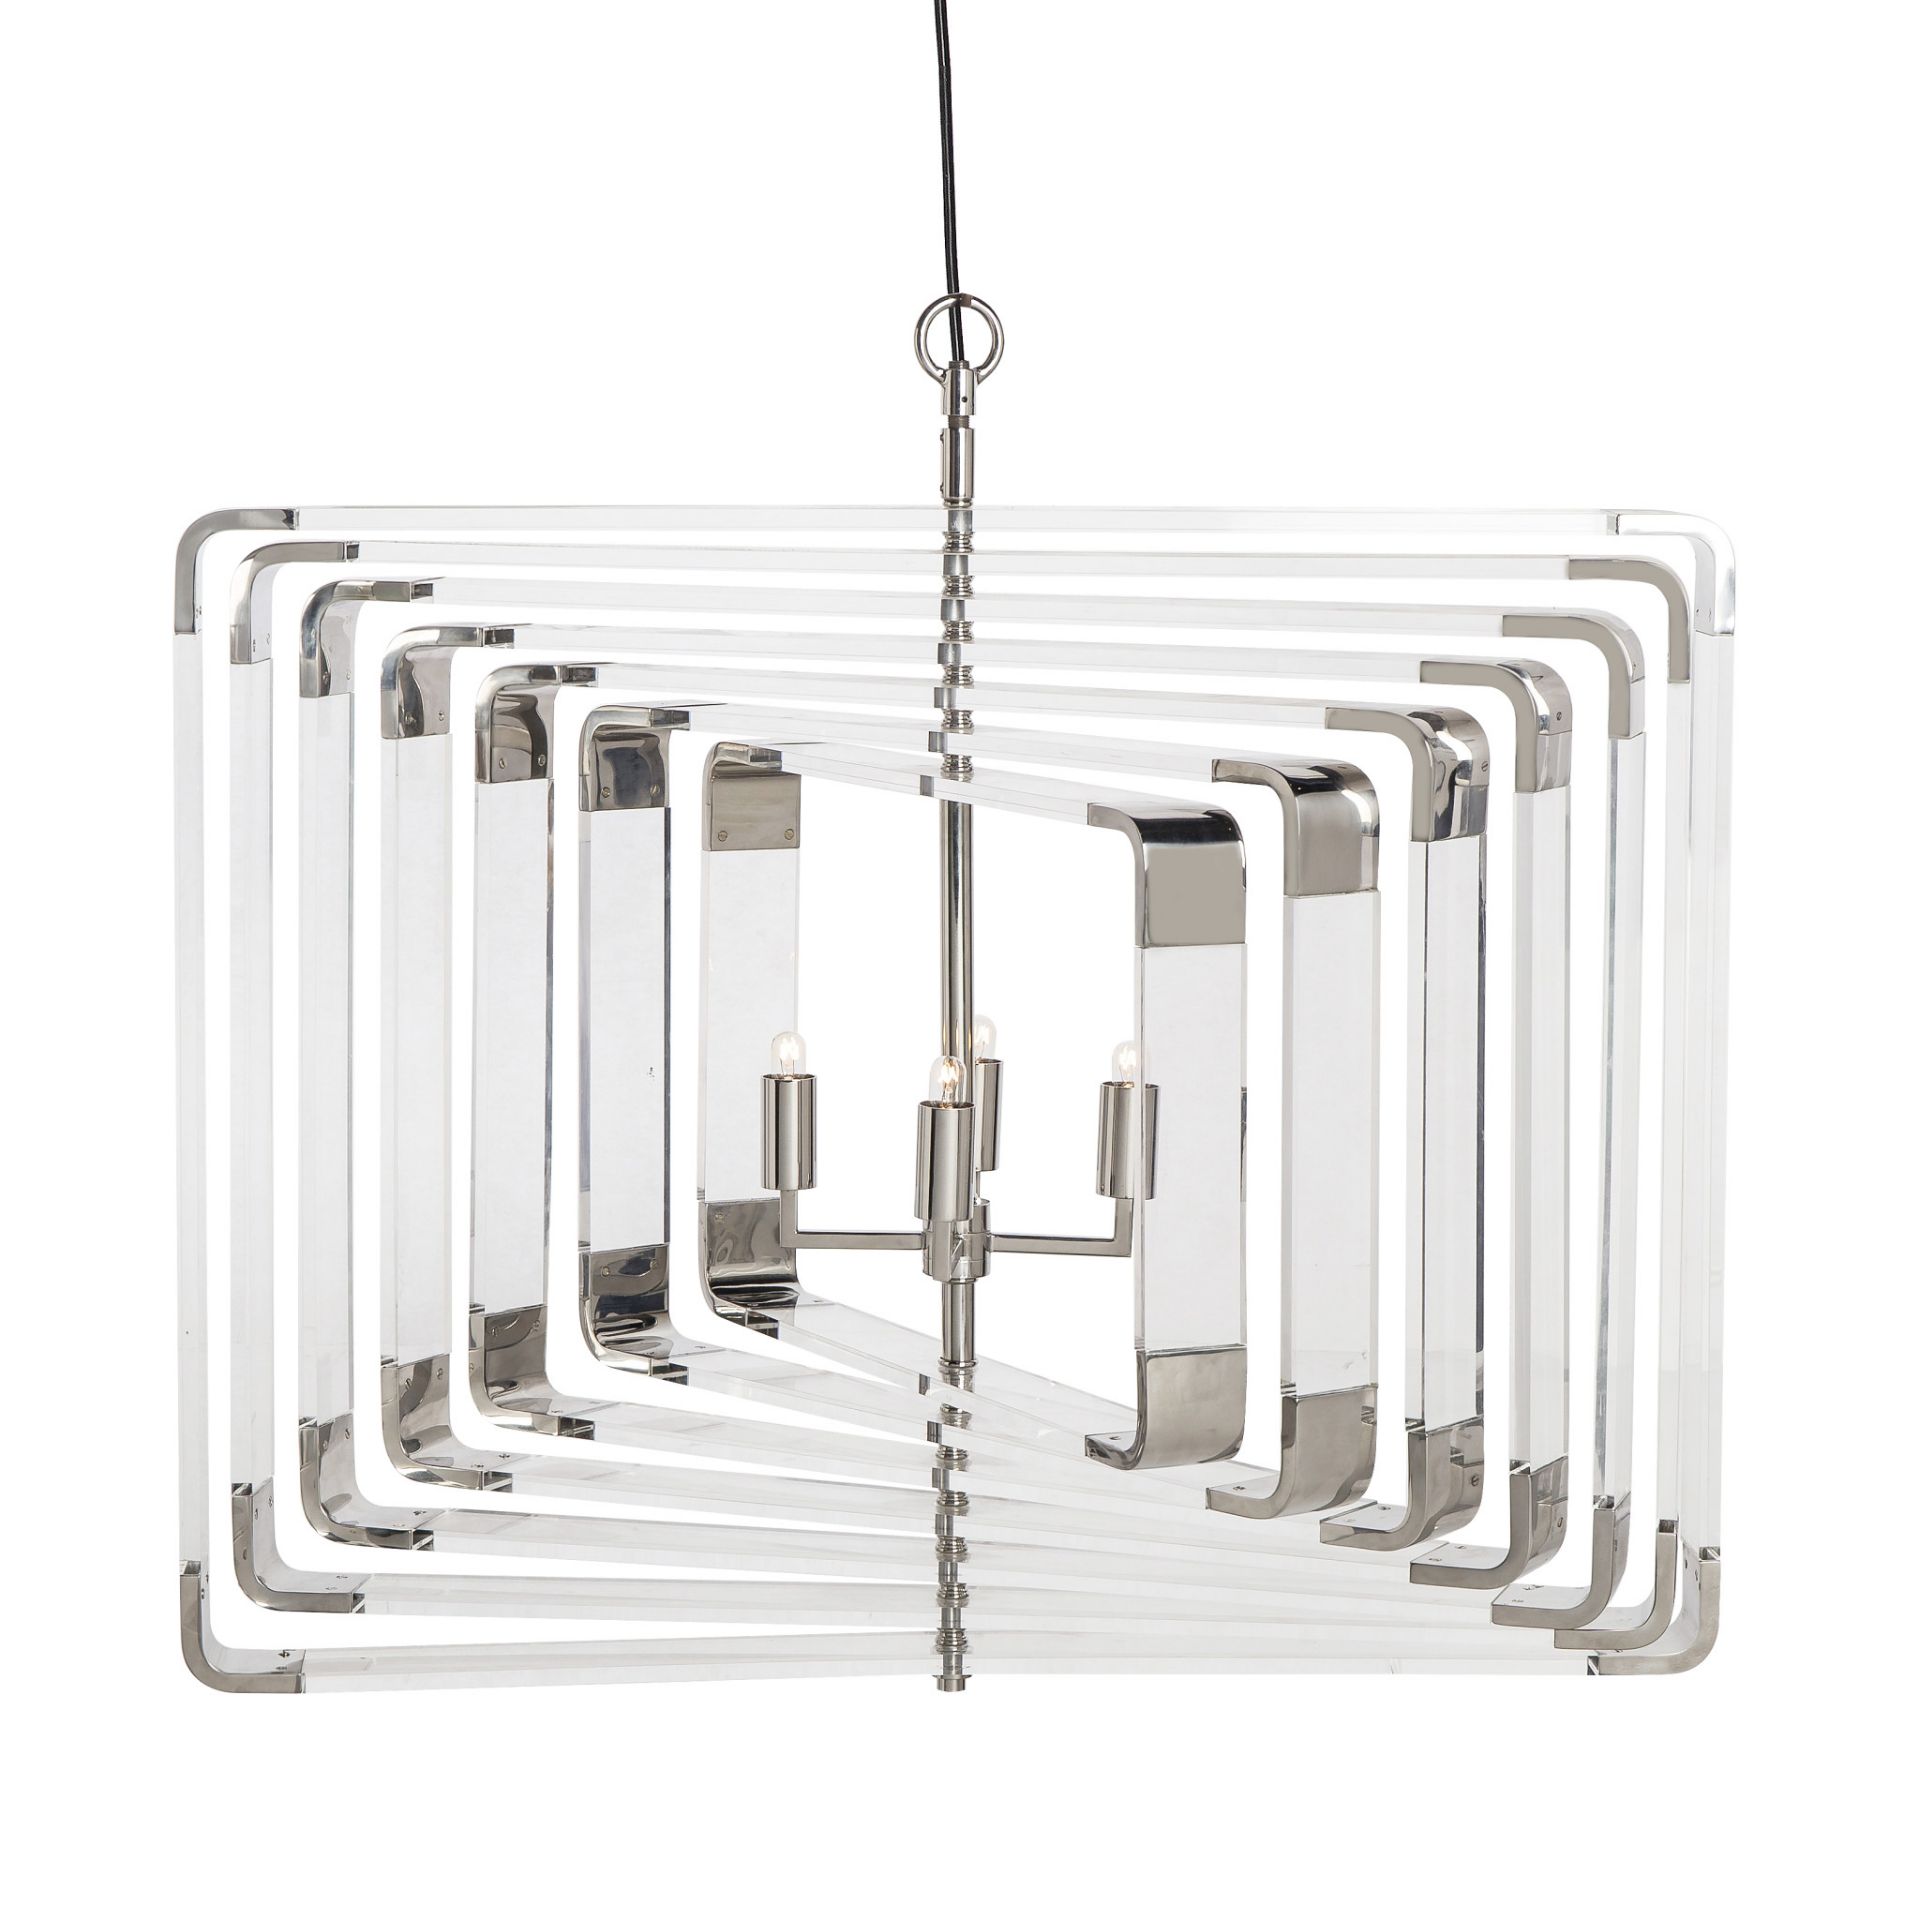 1 x Sonder Living Spiral Acrylic 7-Layer Light With Nickel Finish - New Boxed Stock - Ref: FG1007211 - Image 2 of 6